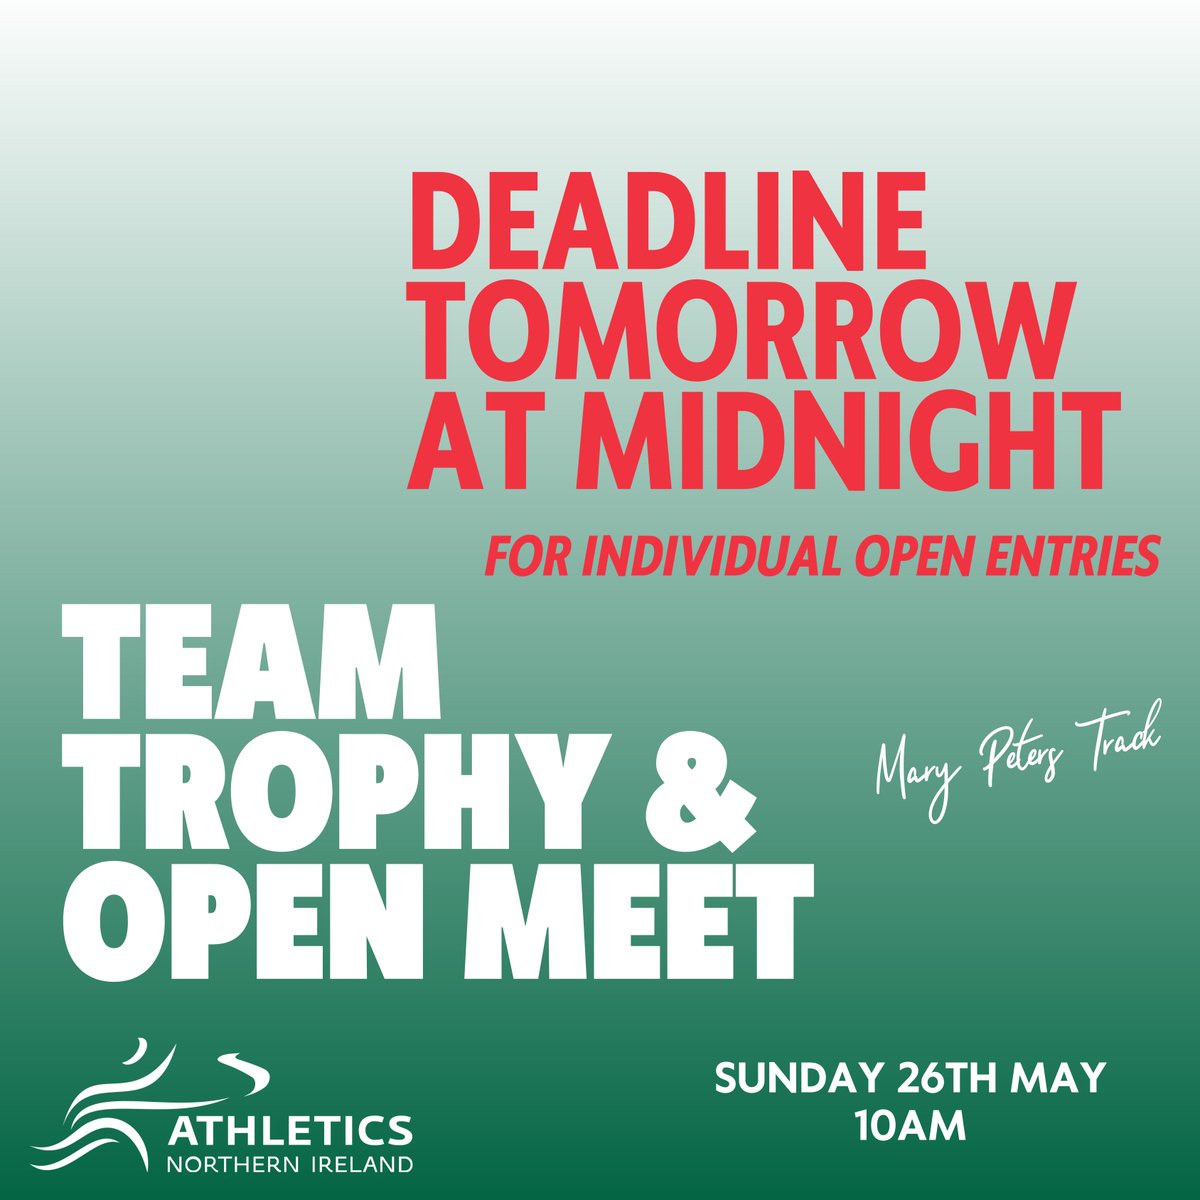 📢 Deadline for Open Entries at Team Trophy & Open Meet Last opportunity for individual open entries at the Team Trophy & Open Meet. The deadline to sign up is tomorrow (Monday 20th May) at midnight. More info and online registration 👇 athleticsni.org/Fixtures/Team-…